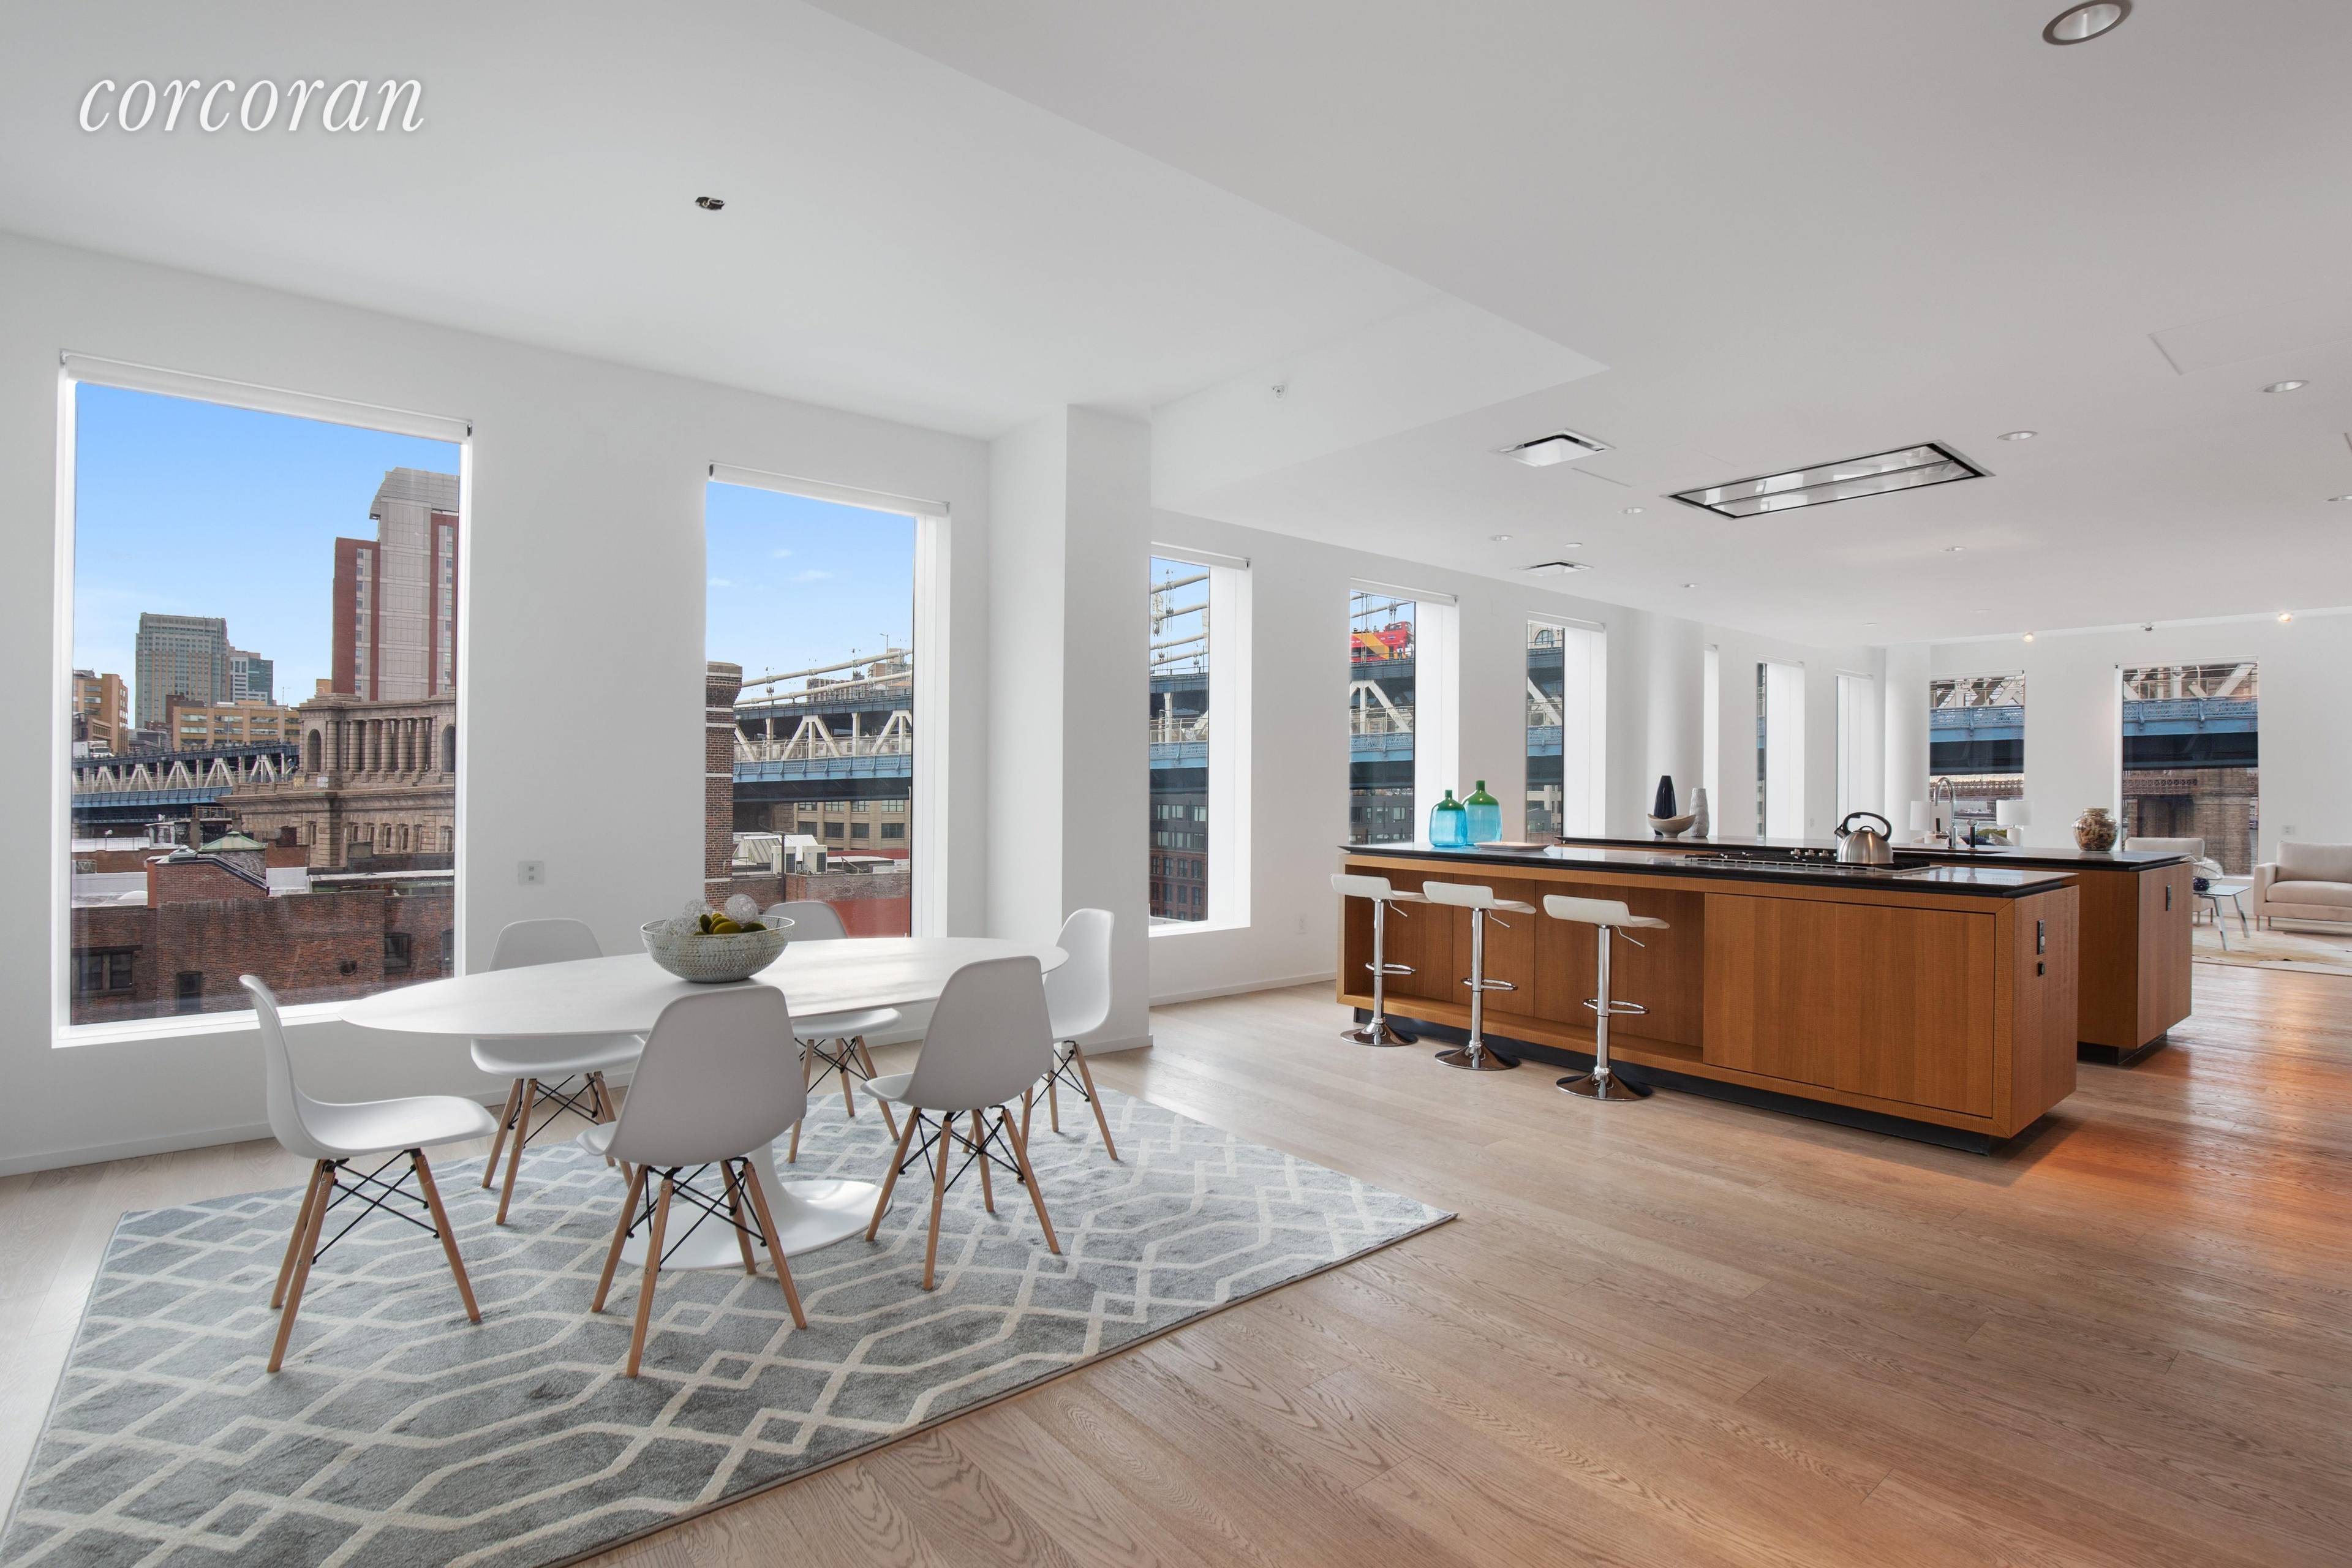 1 John Street DUMBO Luxury Waterfront New Development Completed in 2017 4 Beds, 3.